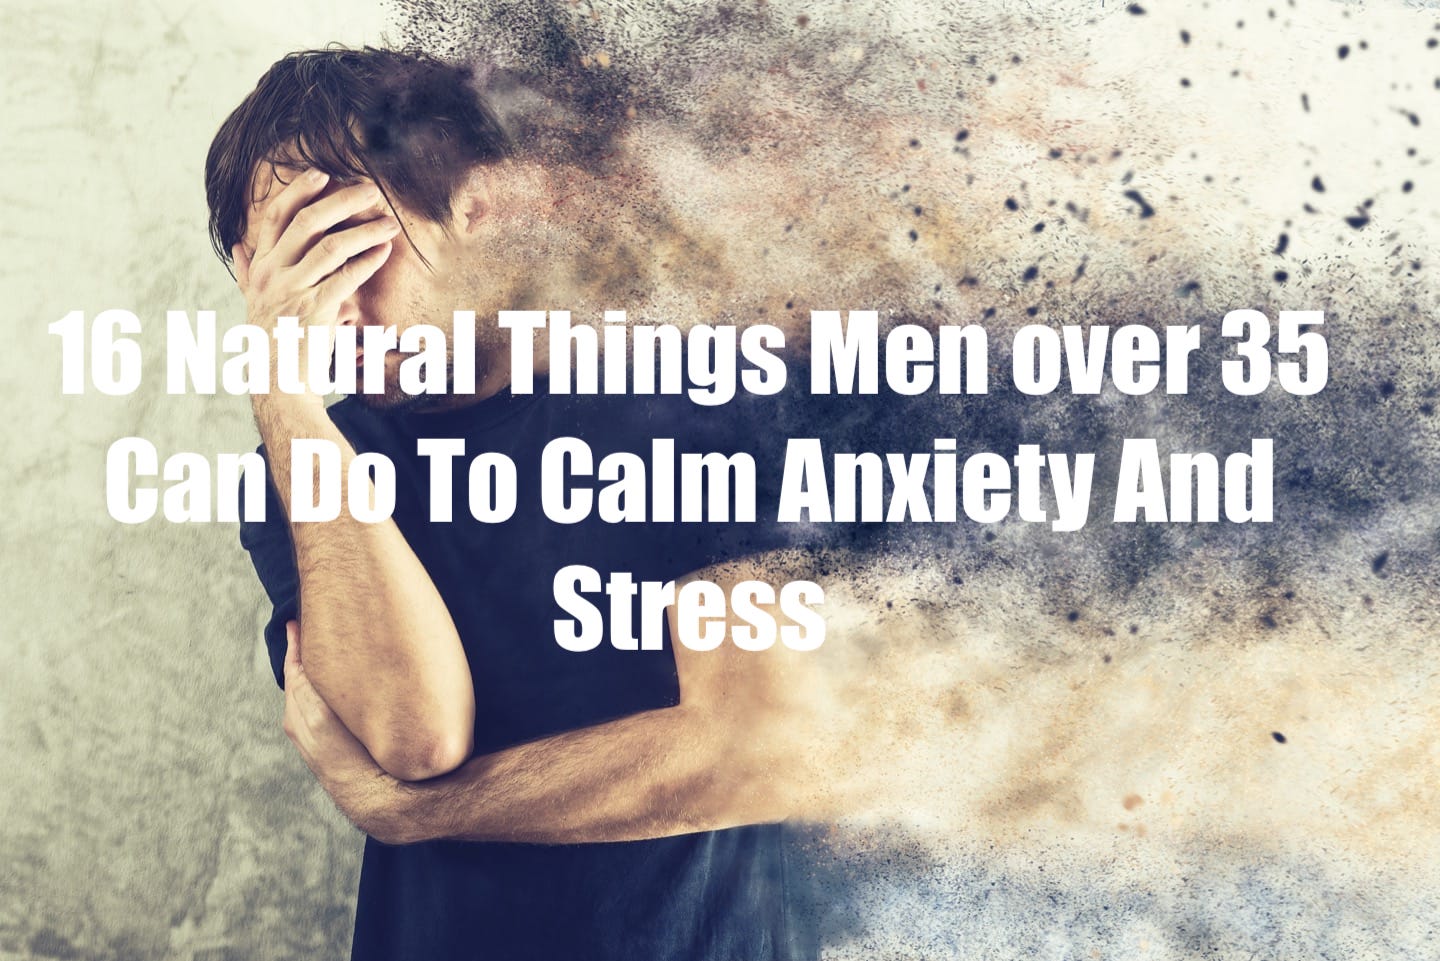 Anxiety solutions for Men over 35